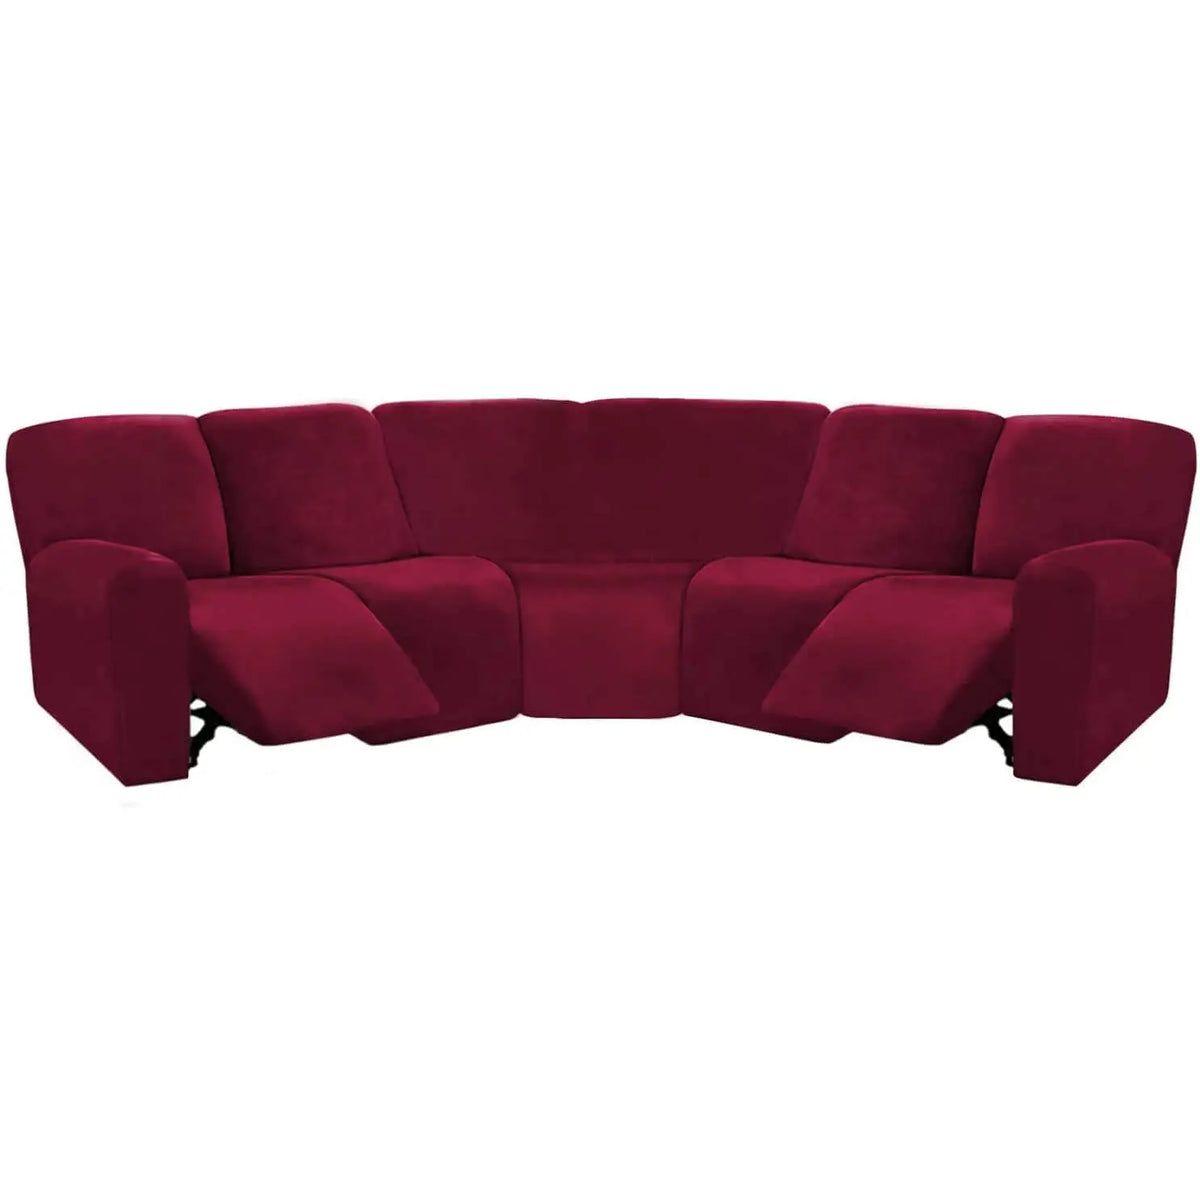 Crfatop 5-seater L Shape Sofa Cover with Recliner Wine